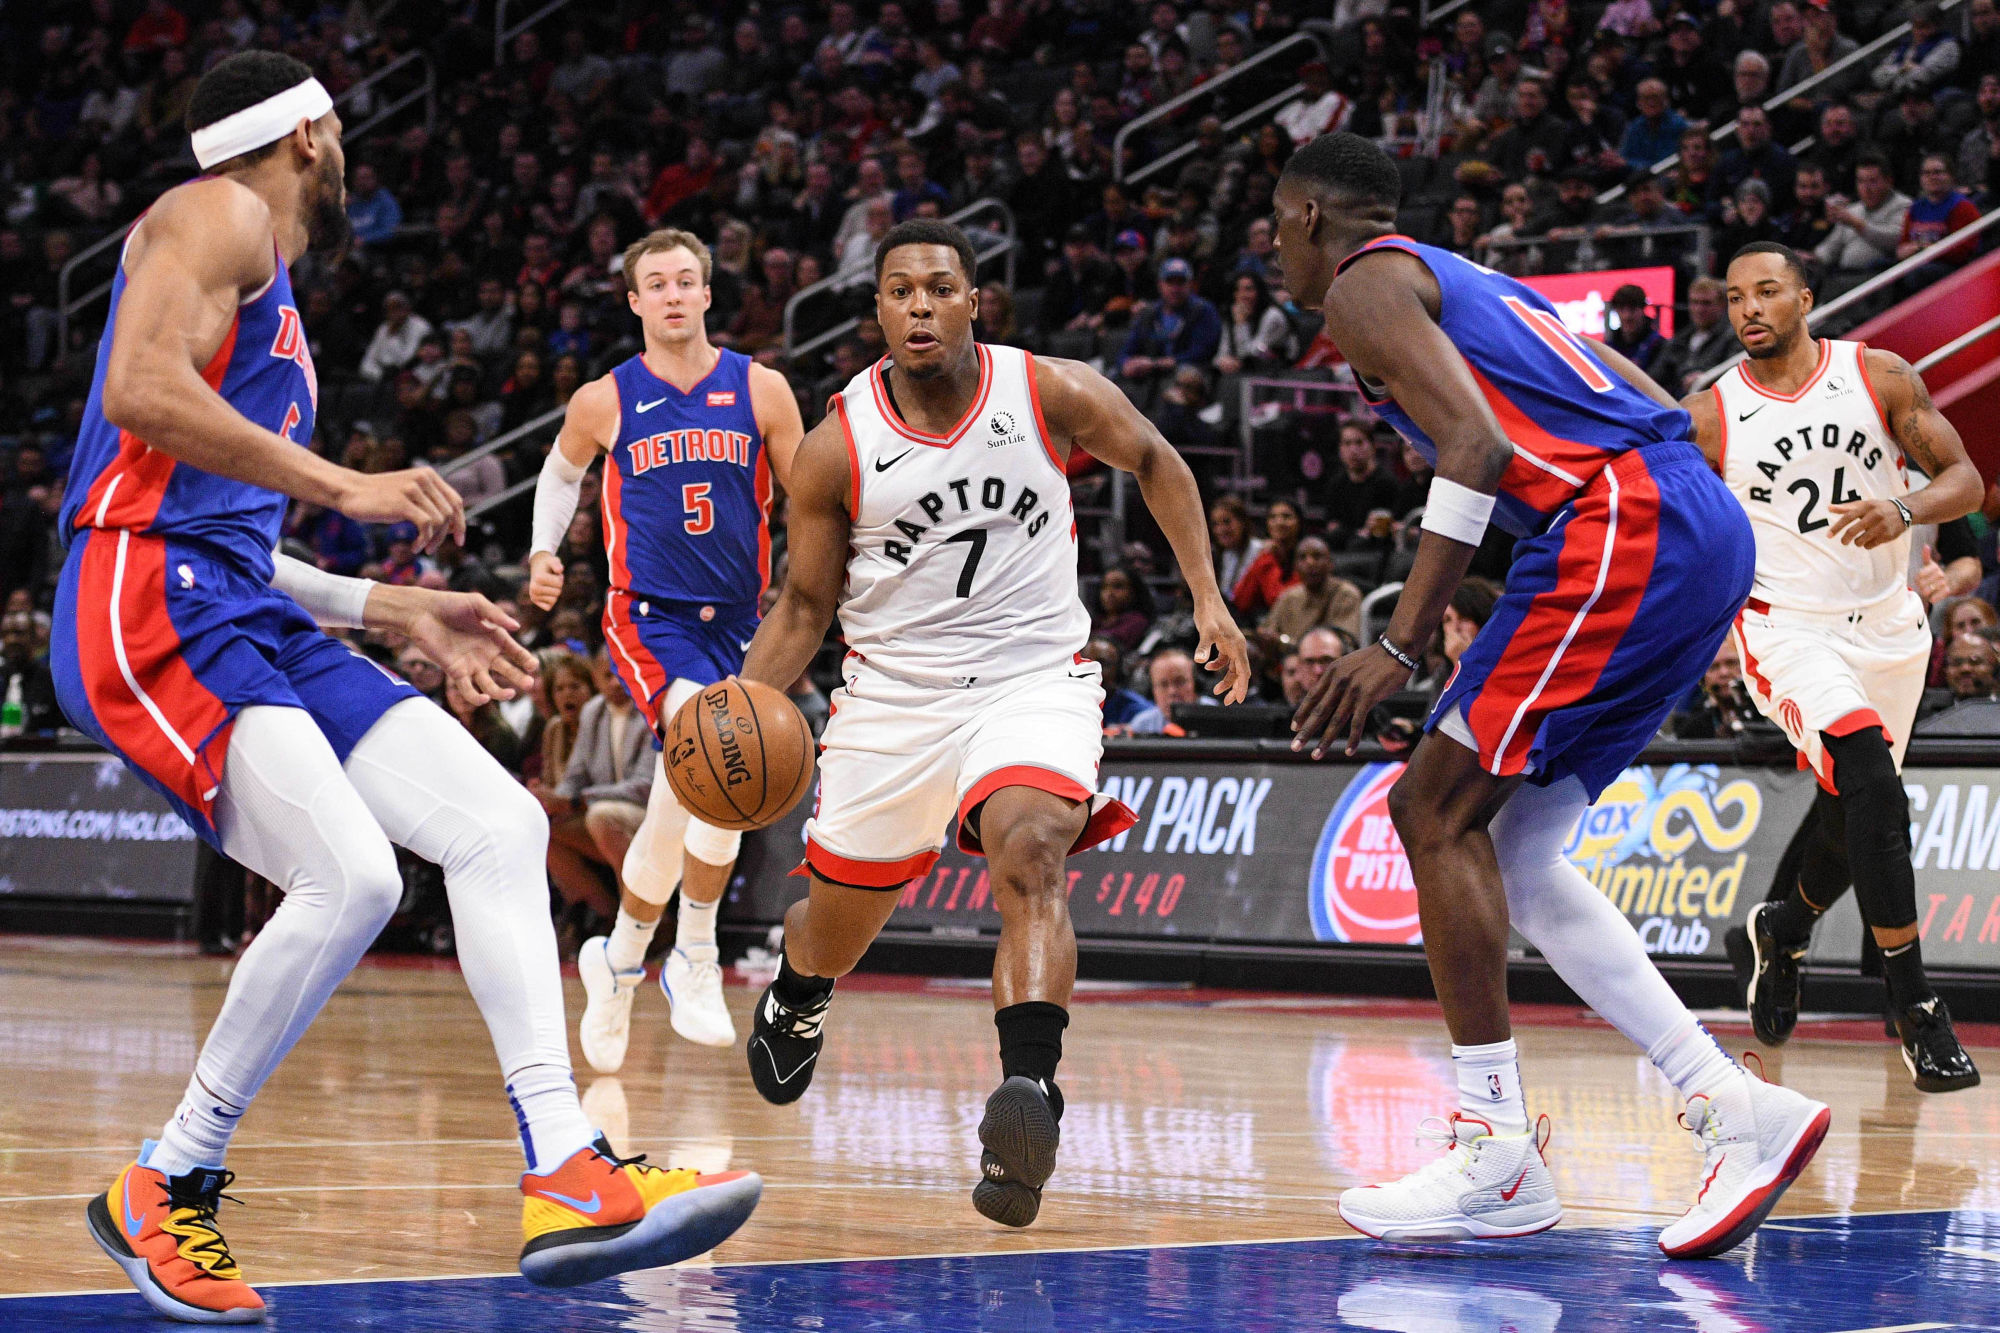 Dec 18, 2019; Detroit, MI, USA; Toronto Raptors guard Kyle Lowry (7) drives to the basket against Detroit Pistons guard Bruce Brown (6) and guard Tony Snell (17) during the second quarter at Little Caesars Arena. Mandatory Credit: Tim Fuller-USA TODAY Sports/Sipa USA 

Photo by Icon Sport - Tony SNELL - Bruce BROWN - Kyle LOWRY - Detroit (Etats Unis)